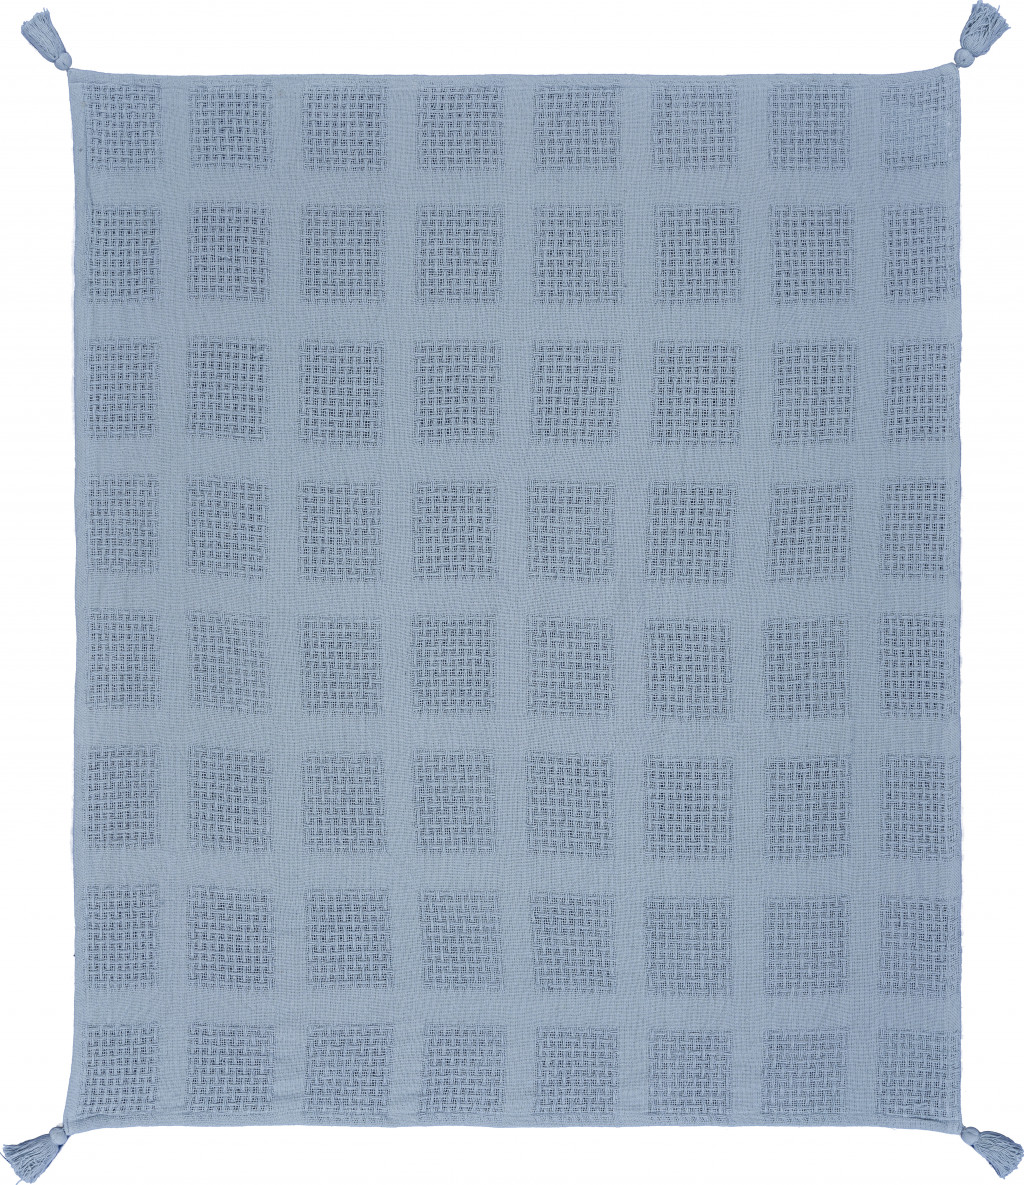 Blue Woven Cotton Solid Color Throw Blanket-516501-1